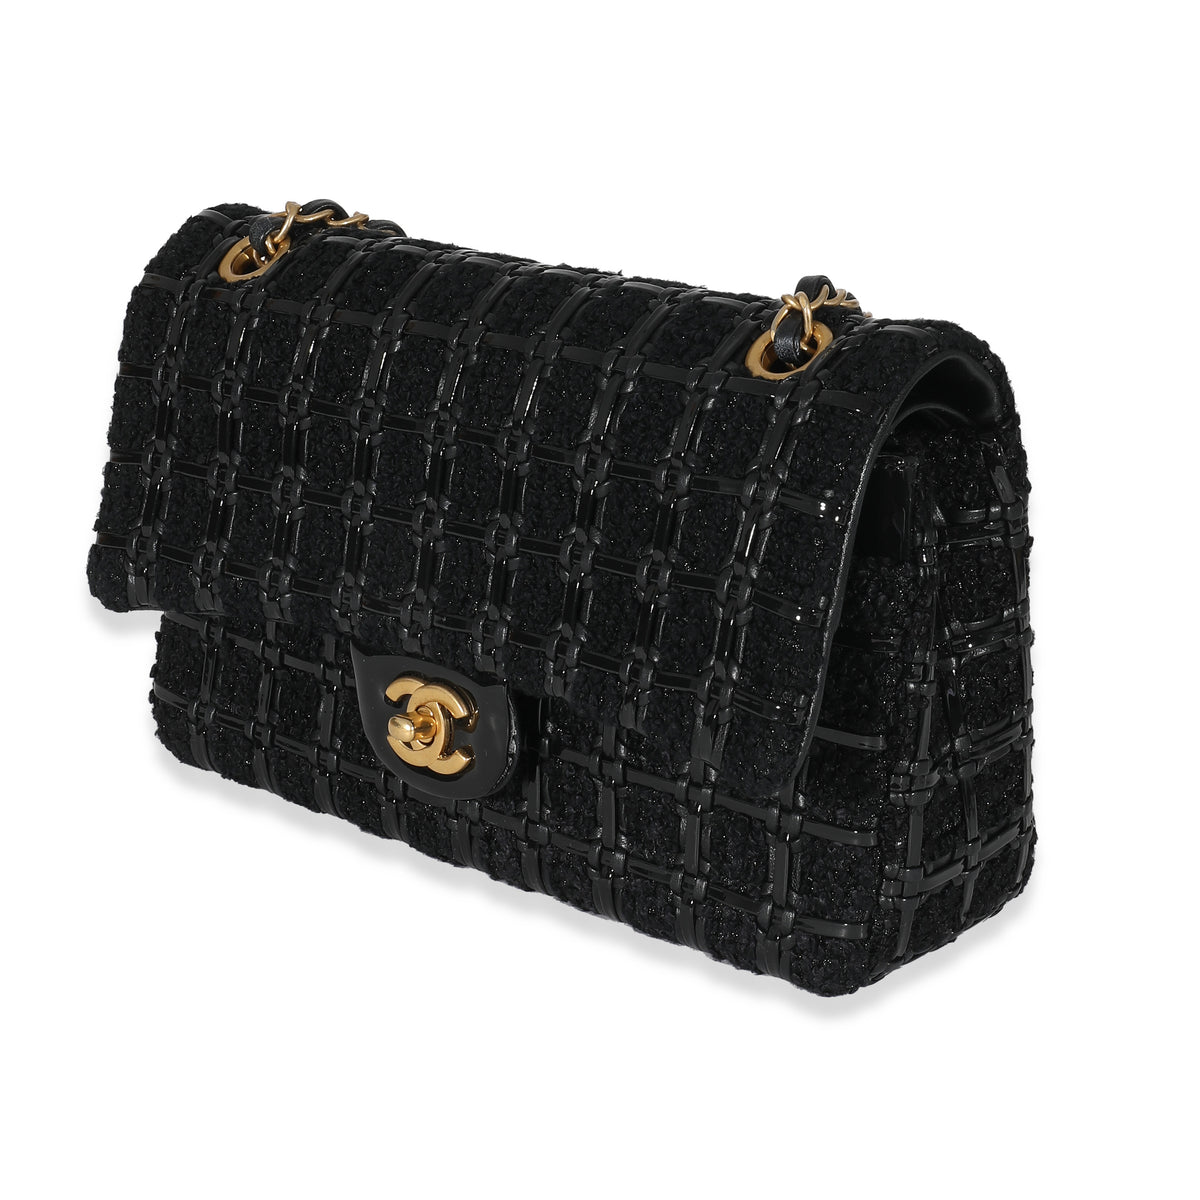 Chanel Black Tweed Woven Leather Medium Classic Double Flap Bag